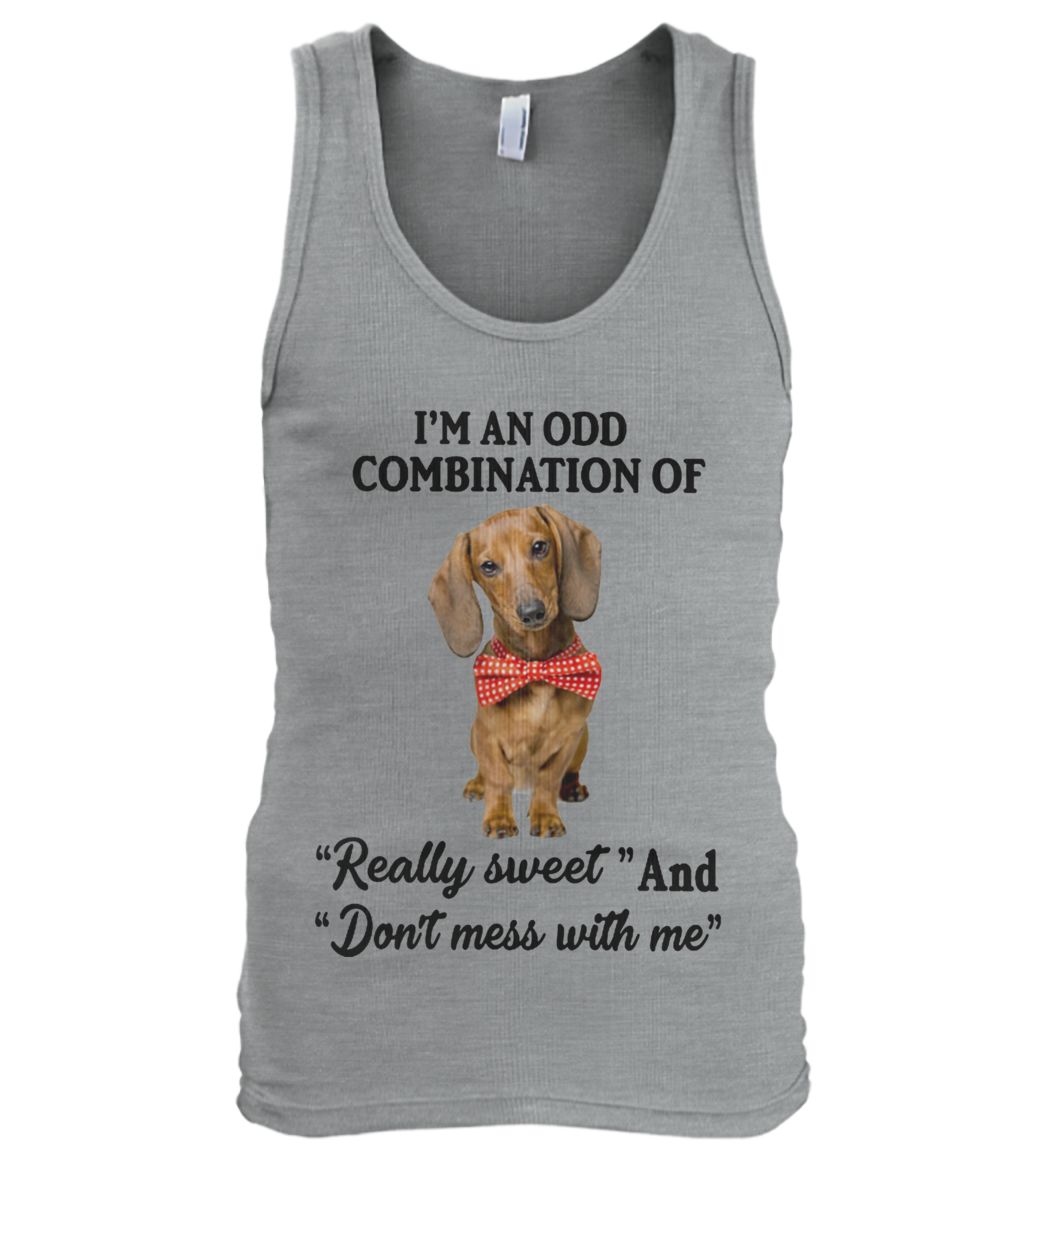 Dachshund I'm an odd combination of really sweet and don't mess with me men's tank top